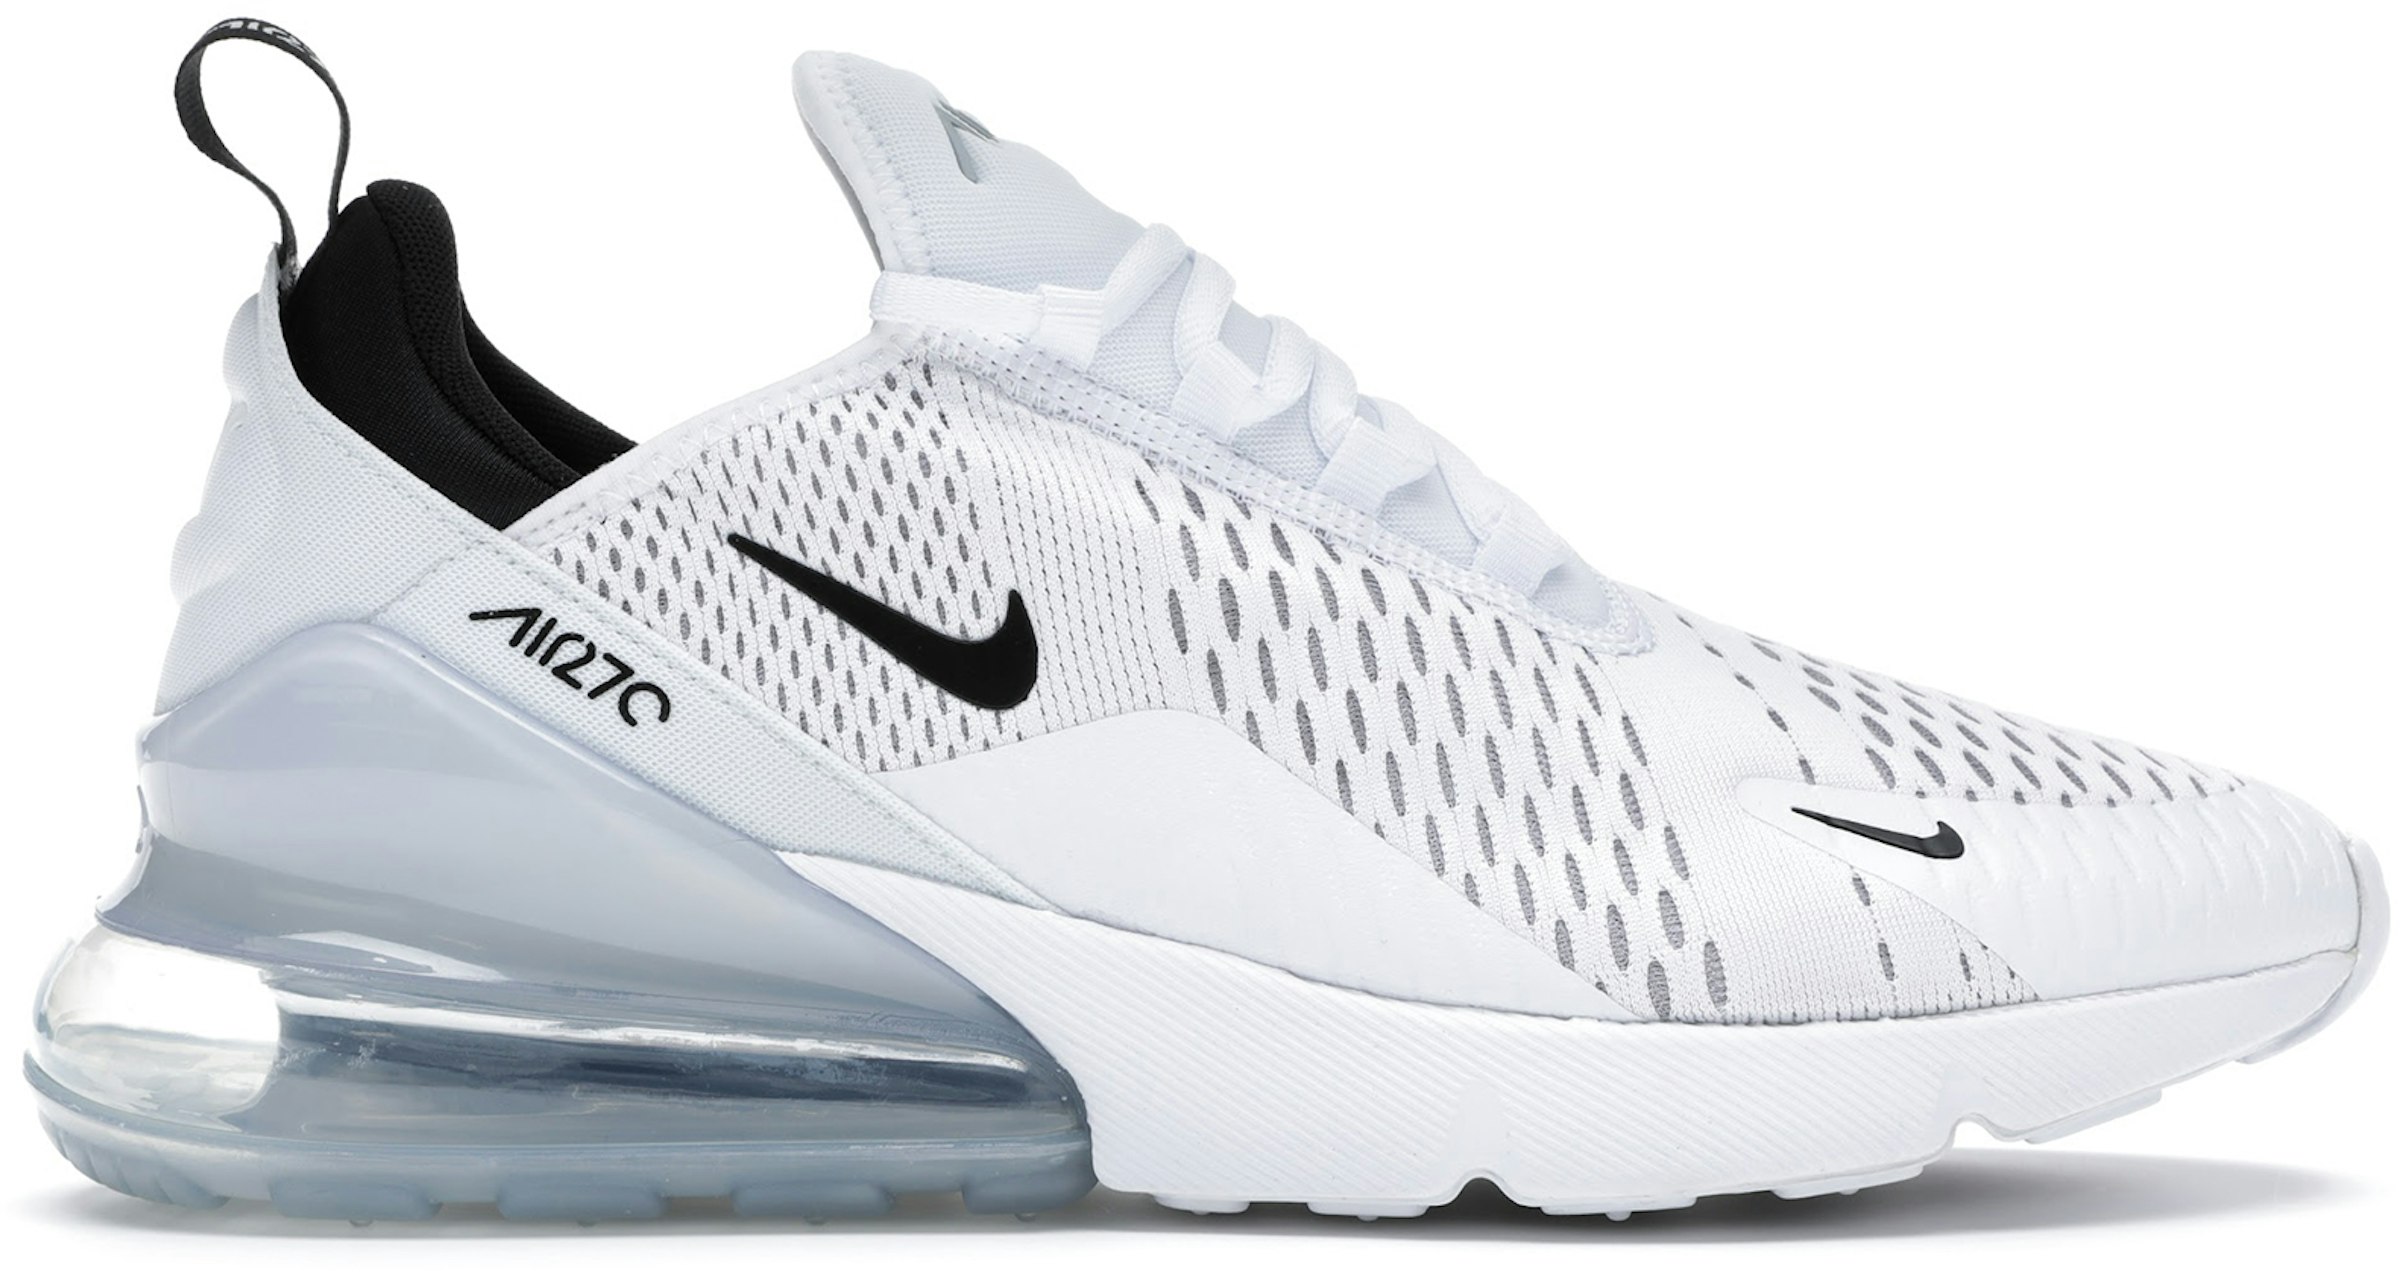 Buy Nike Max Shoes & New Sneakers -